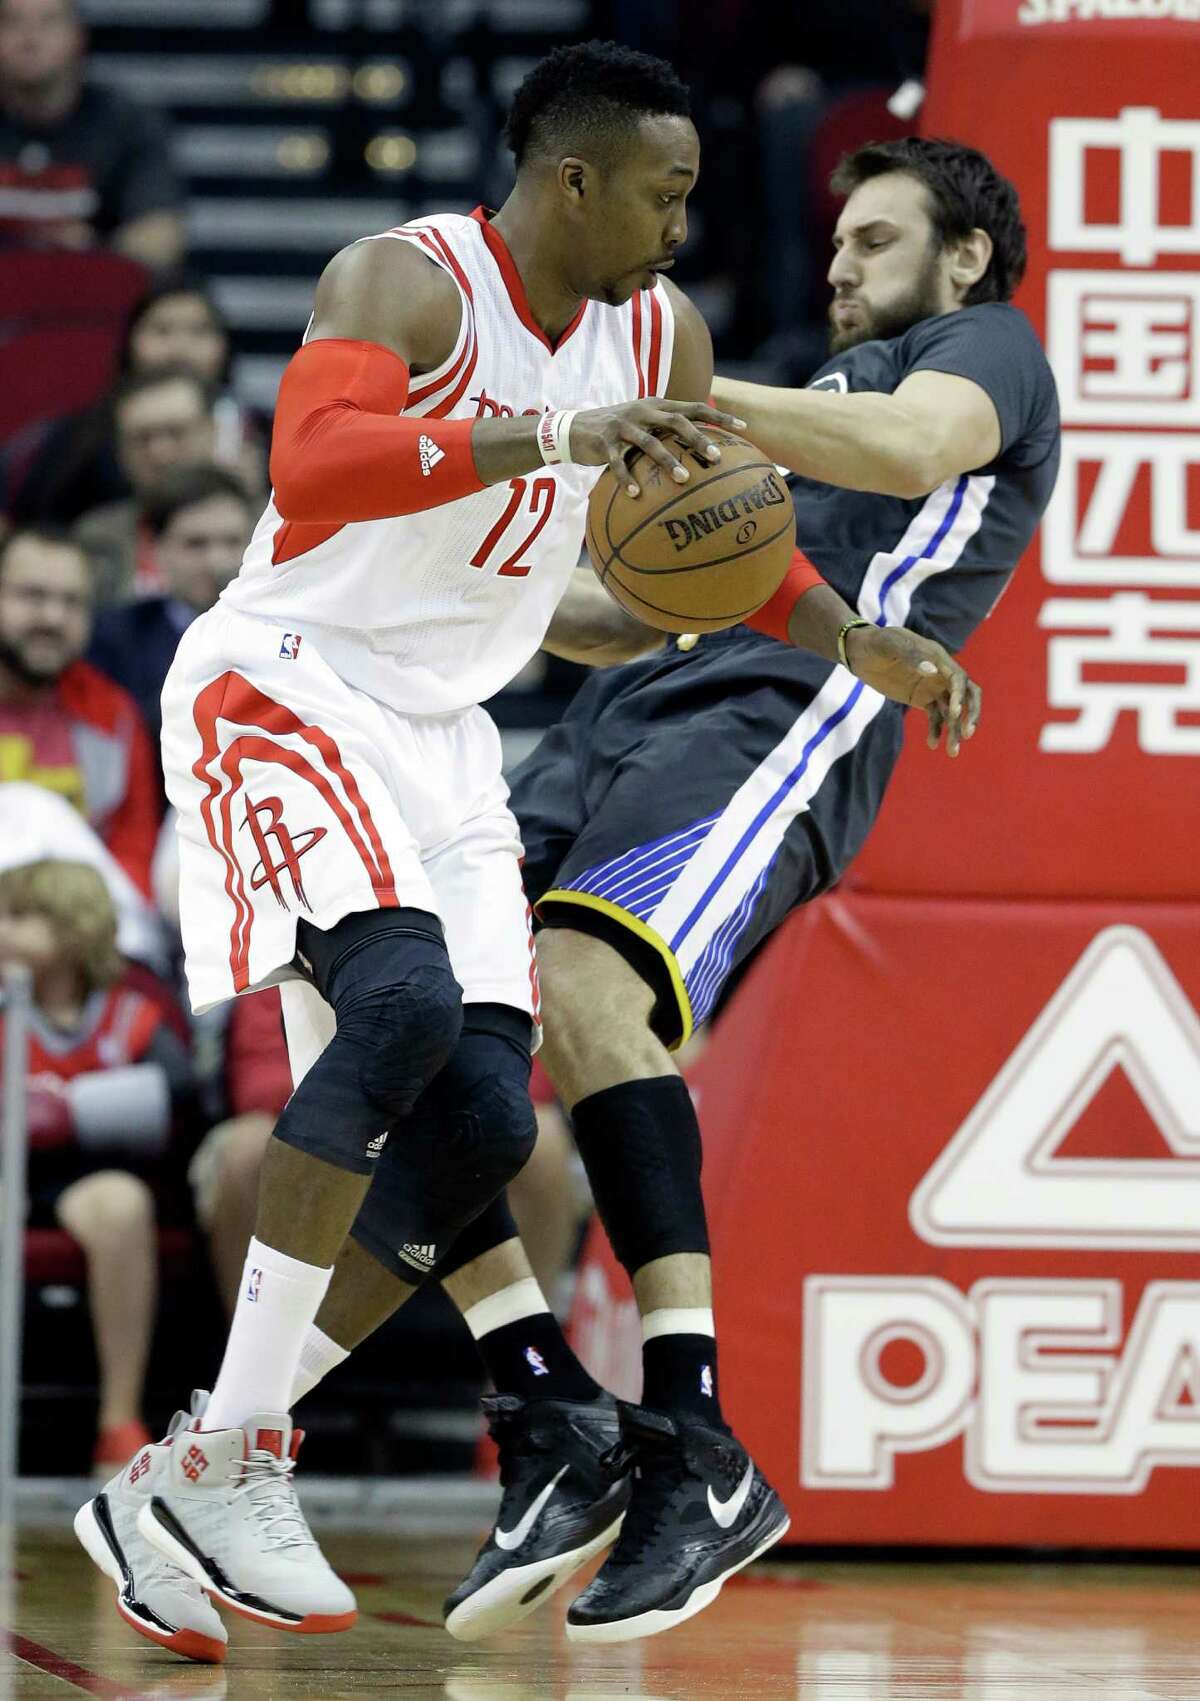 The Warriors Andrew Bogut draws a charge from the Rockets' Dwight Howard during the teams’ Jan. 17 game in Houston.